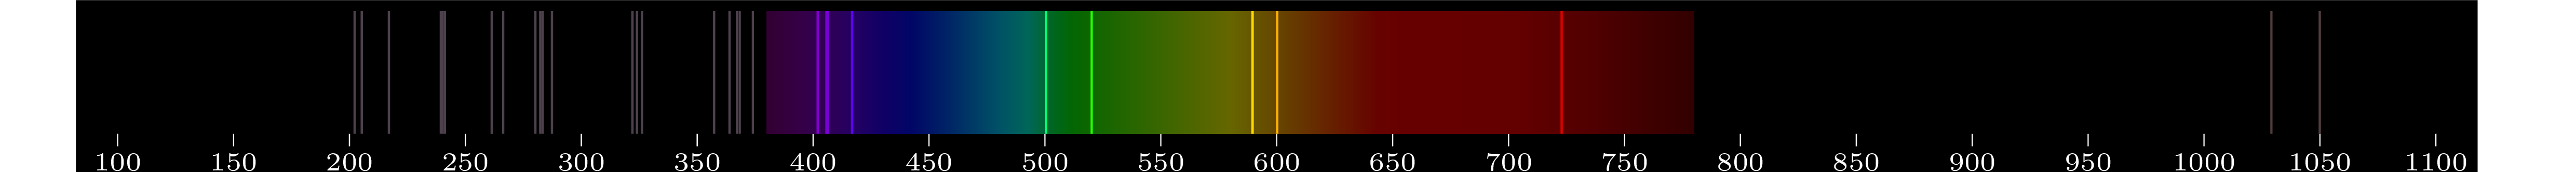 emmision spectra of element Pb